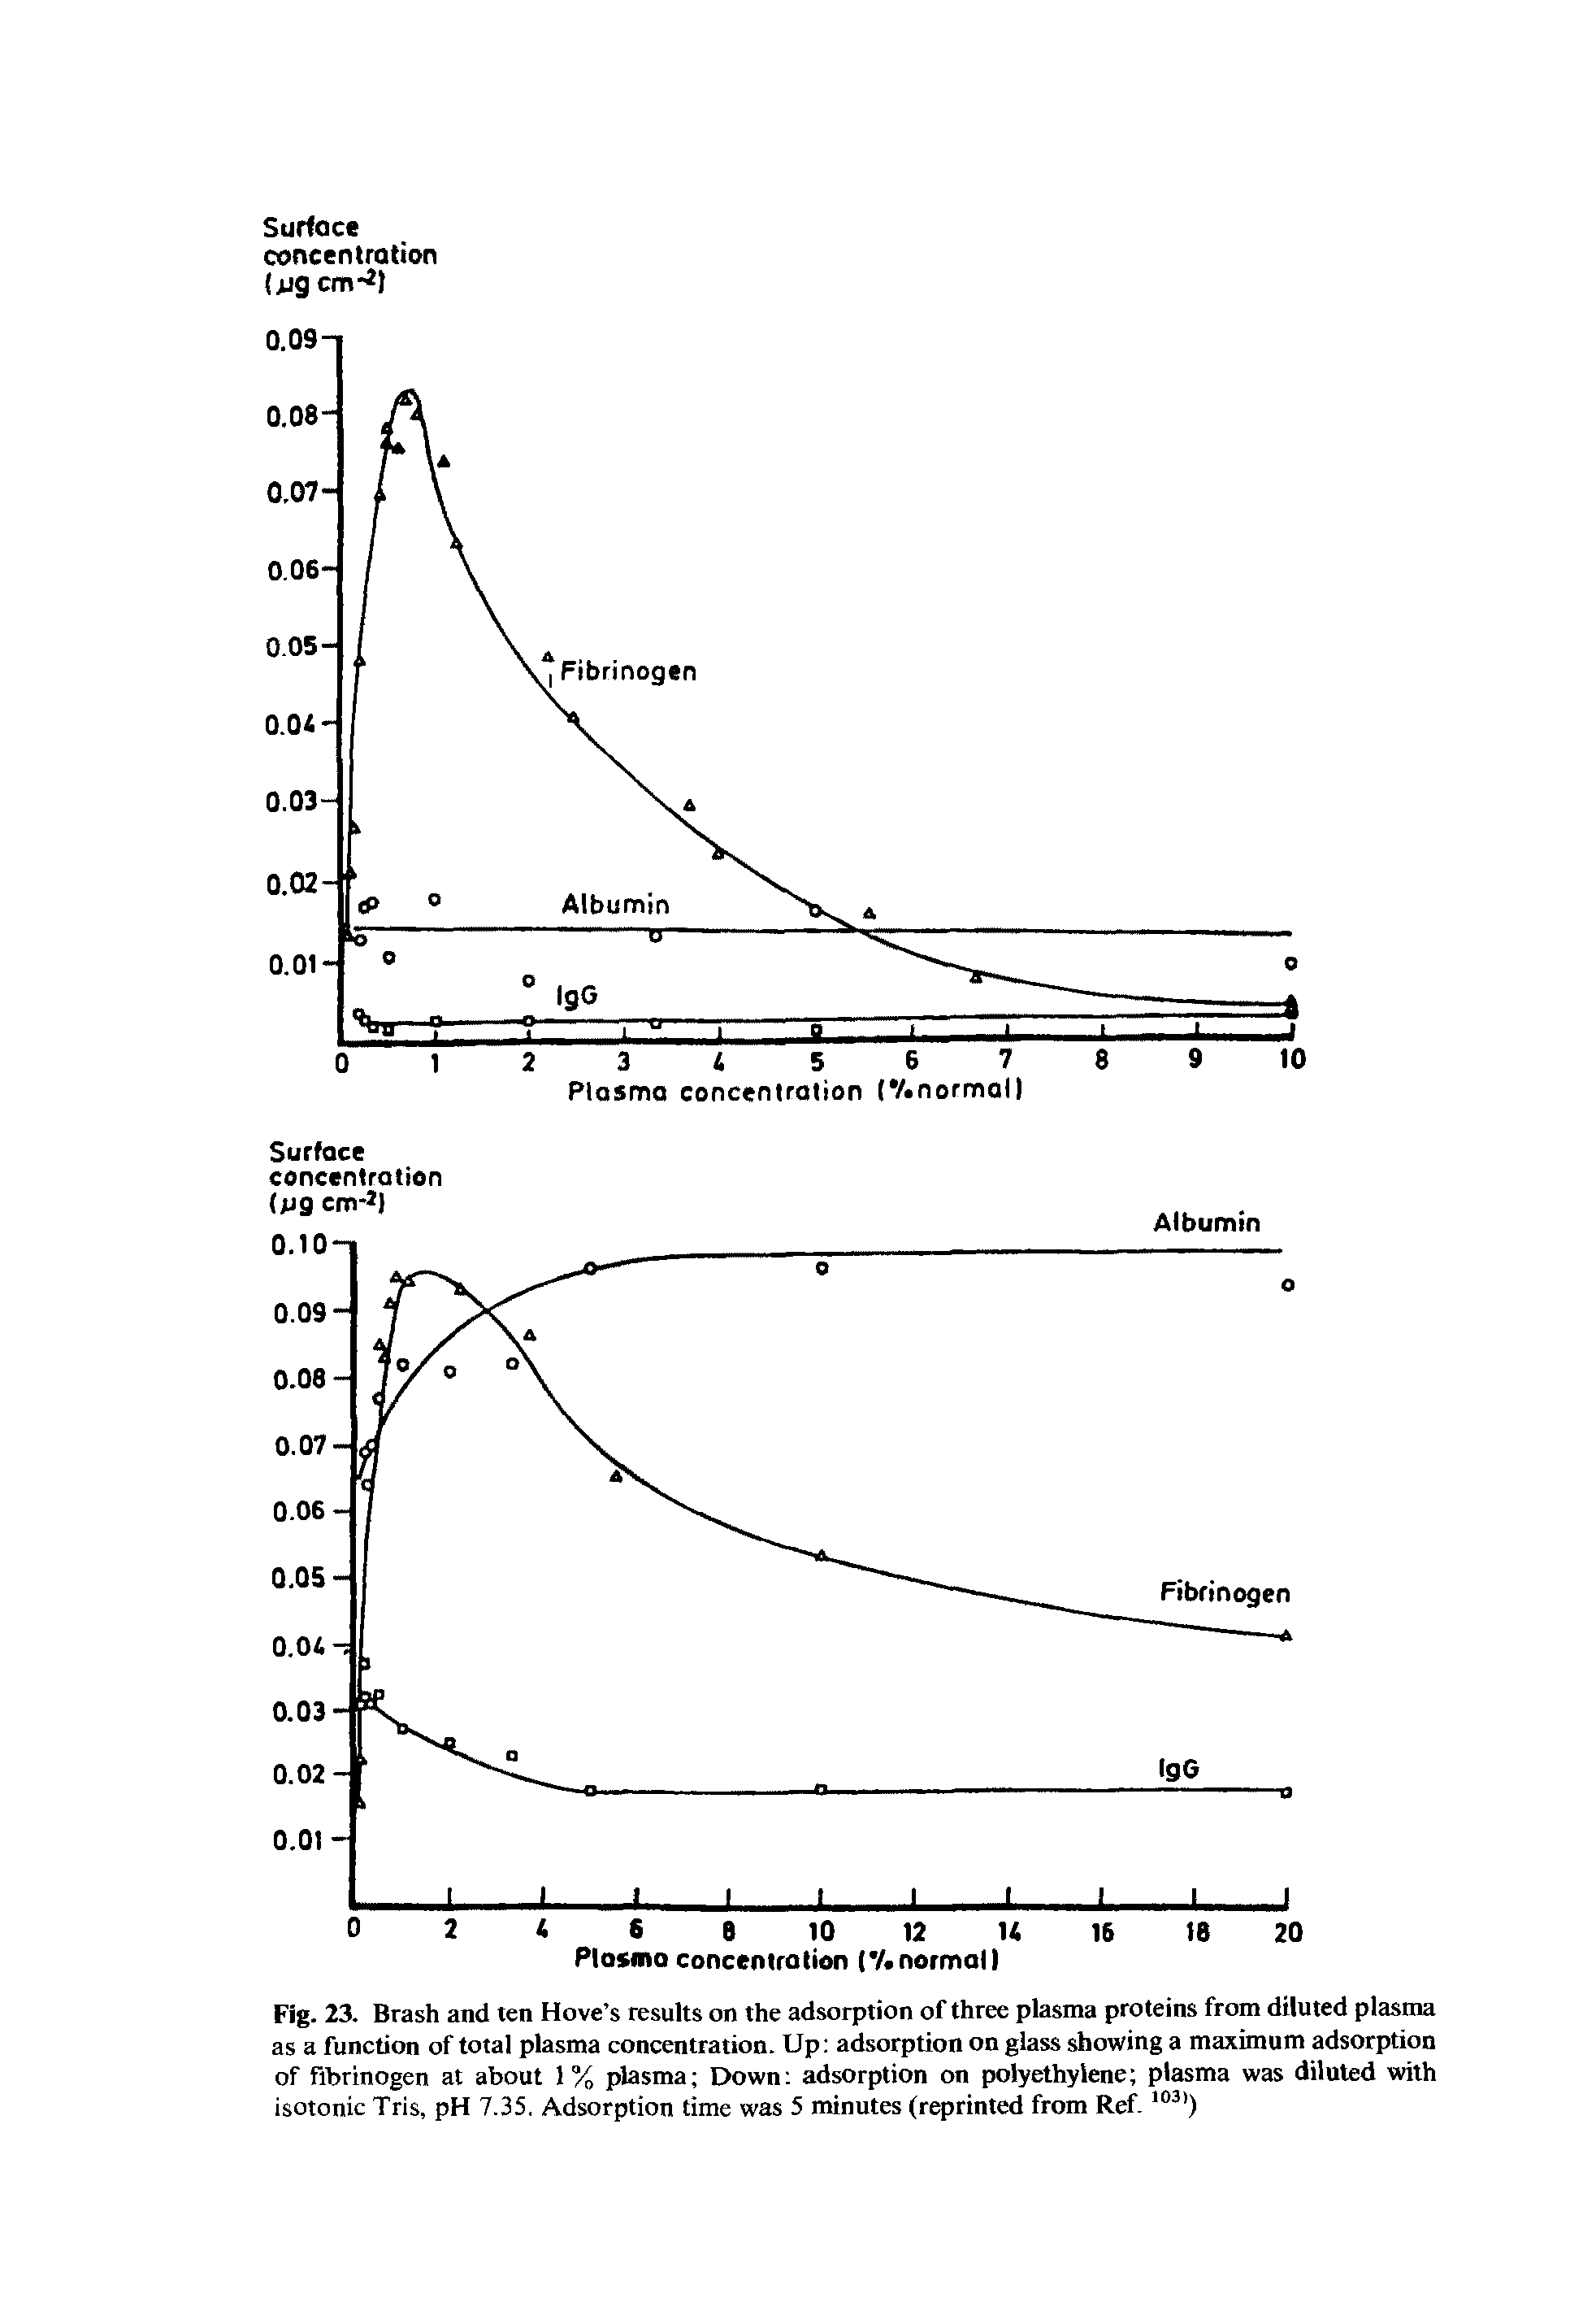 Fig. 23. Brash and ten Hove s results on the adsorption of three plasma proteins from diluted plasma as a function of total plasma concentration. Up adsorption on glass showing a maximum adsorption of fibrinogen at about 1% plasma Down adsorption on polyethylene plasma was diluted with isotonic Tris, pH 7.35. Adsorption time was 5 minutes (reprinted from Ref.1031)...